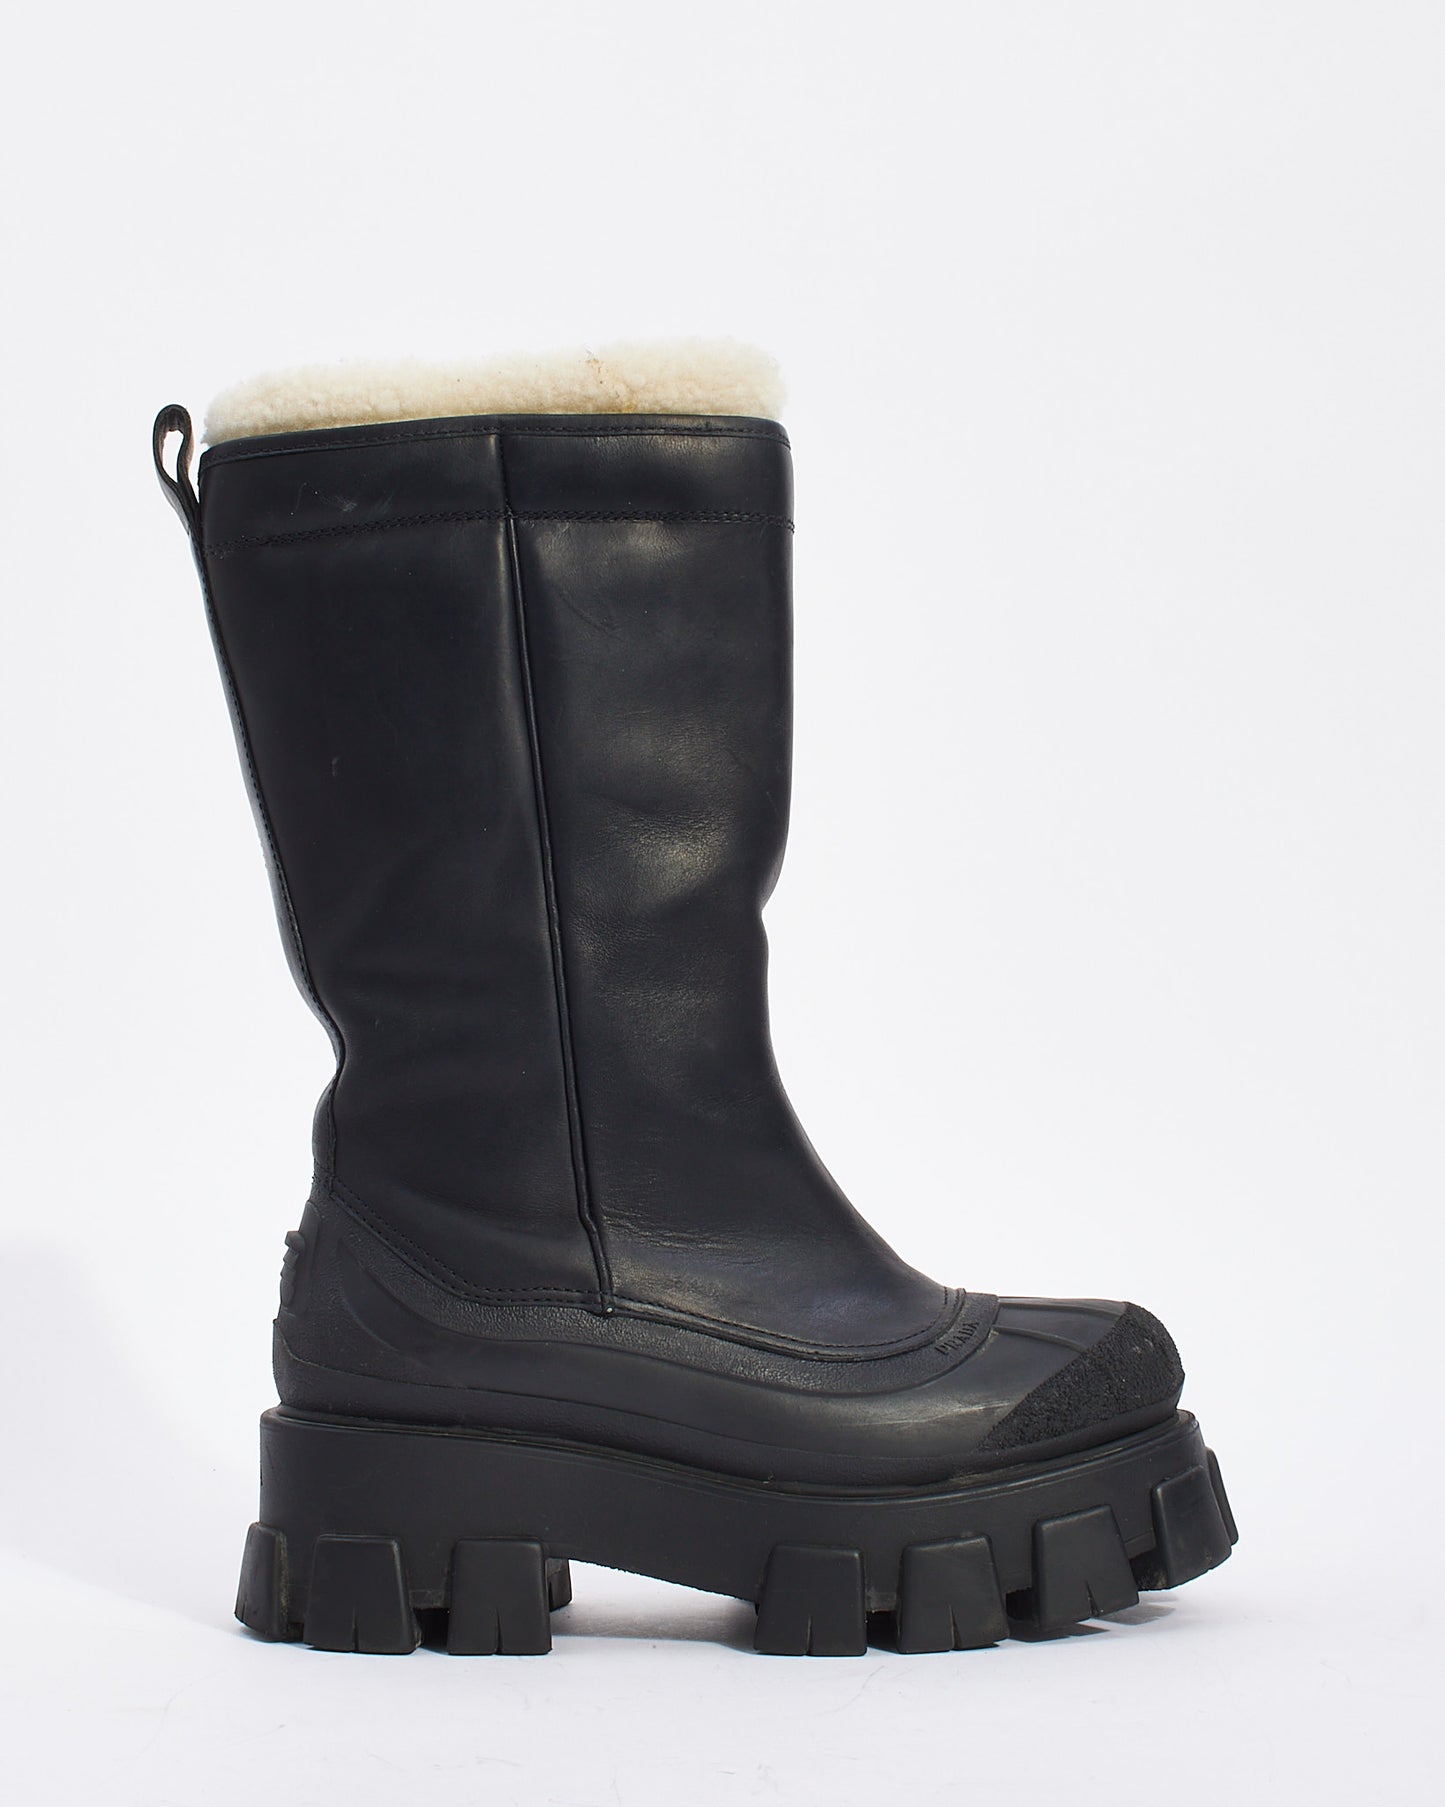 Prada Black Leather Shearling Trimmed Monolith Leather Boots - 37.5